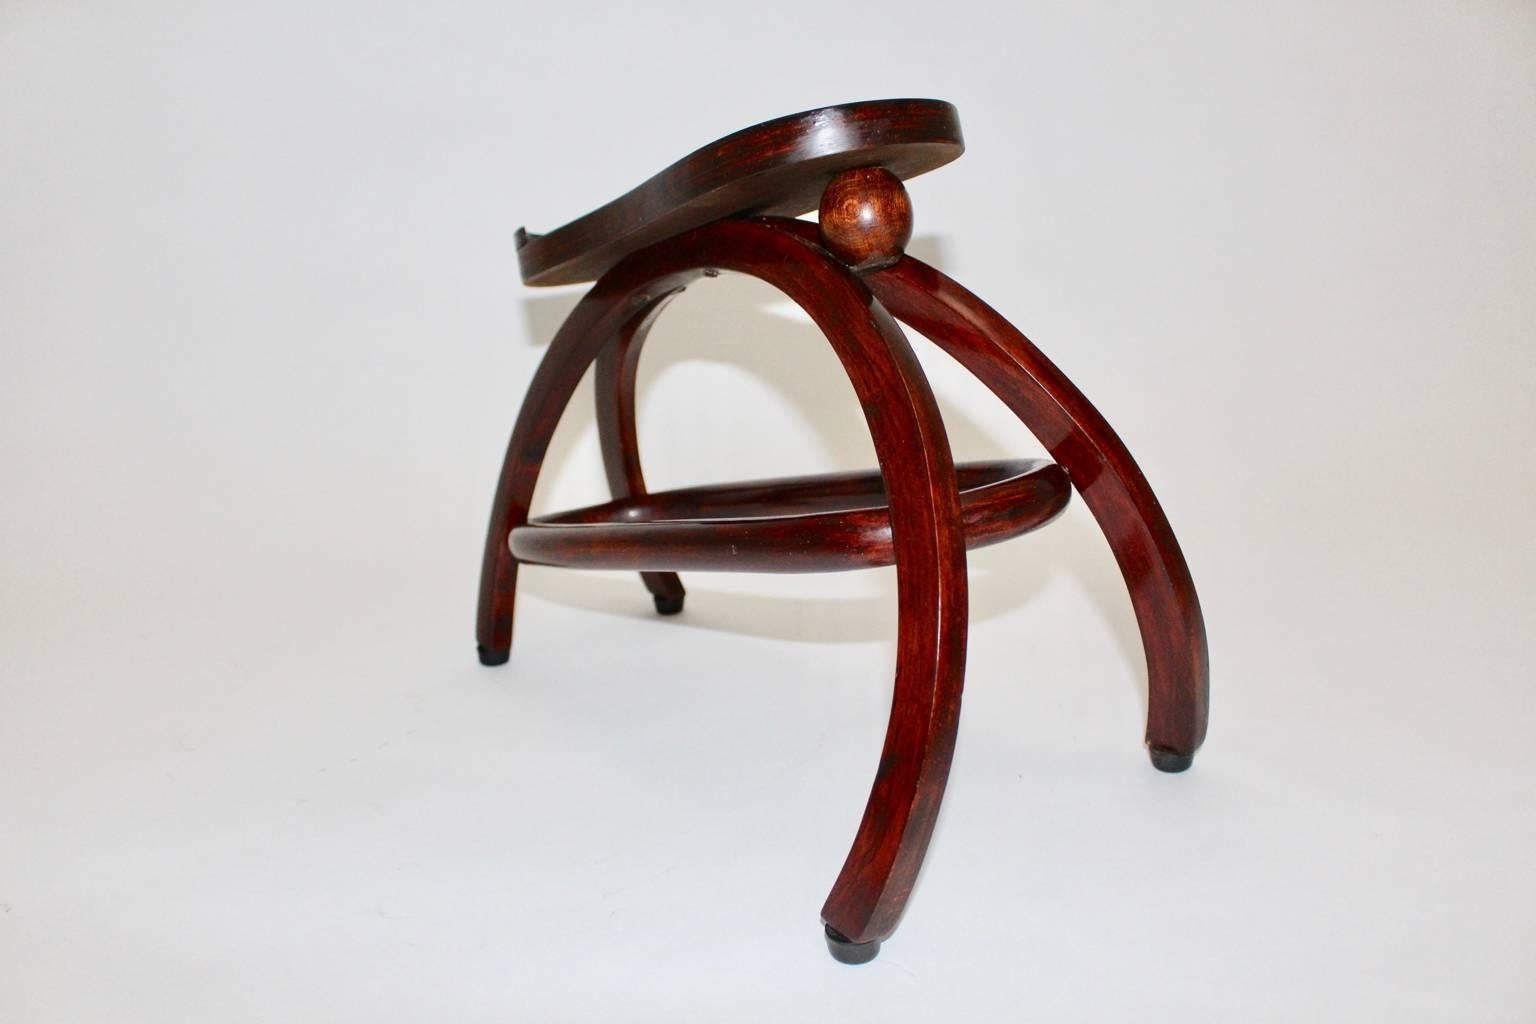 A very rare Jugenstil shoe stool by Josef Hoffmann designed circa 1907 
and executed by Gebr. Thonet Vienna.
The material is mahogany stained bentwood, while the surface is newly hand-polished with shellac.
Best condition !
A special feature is the